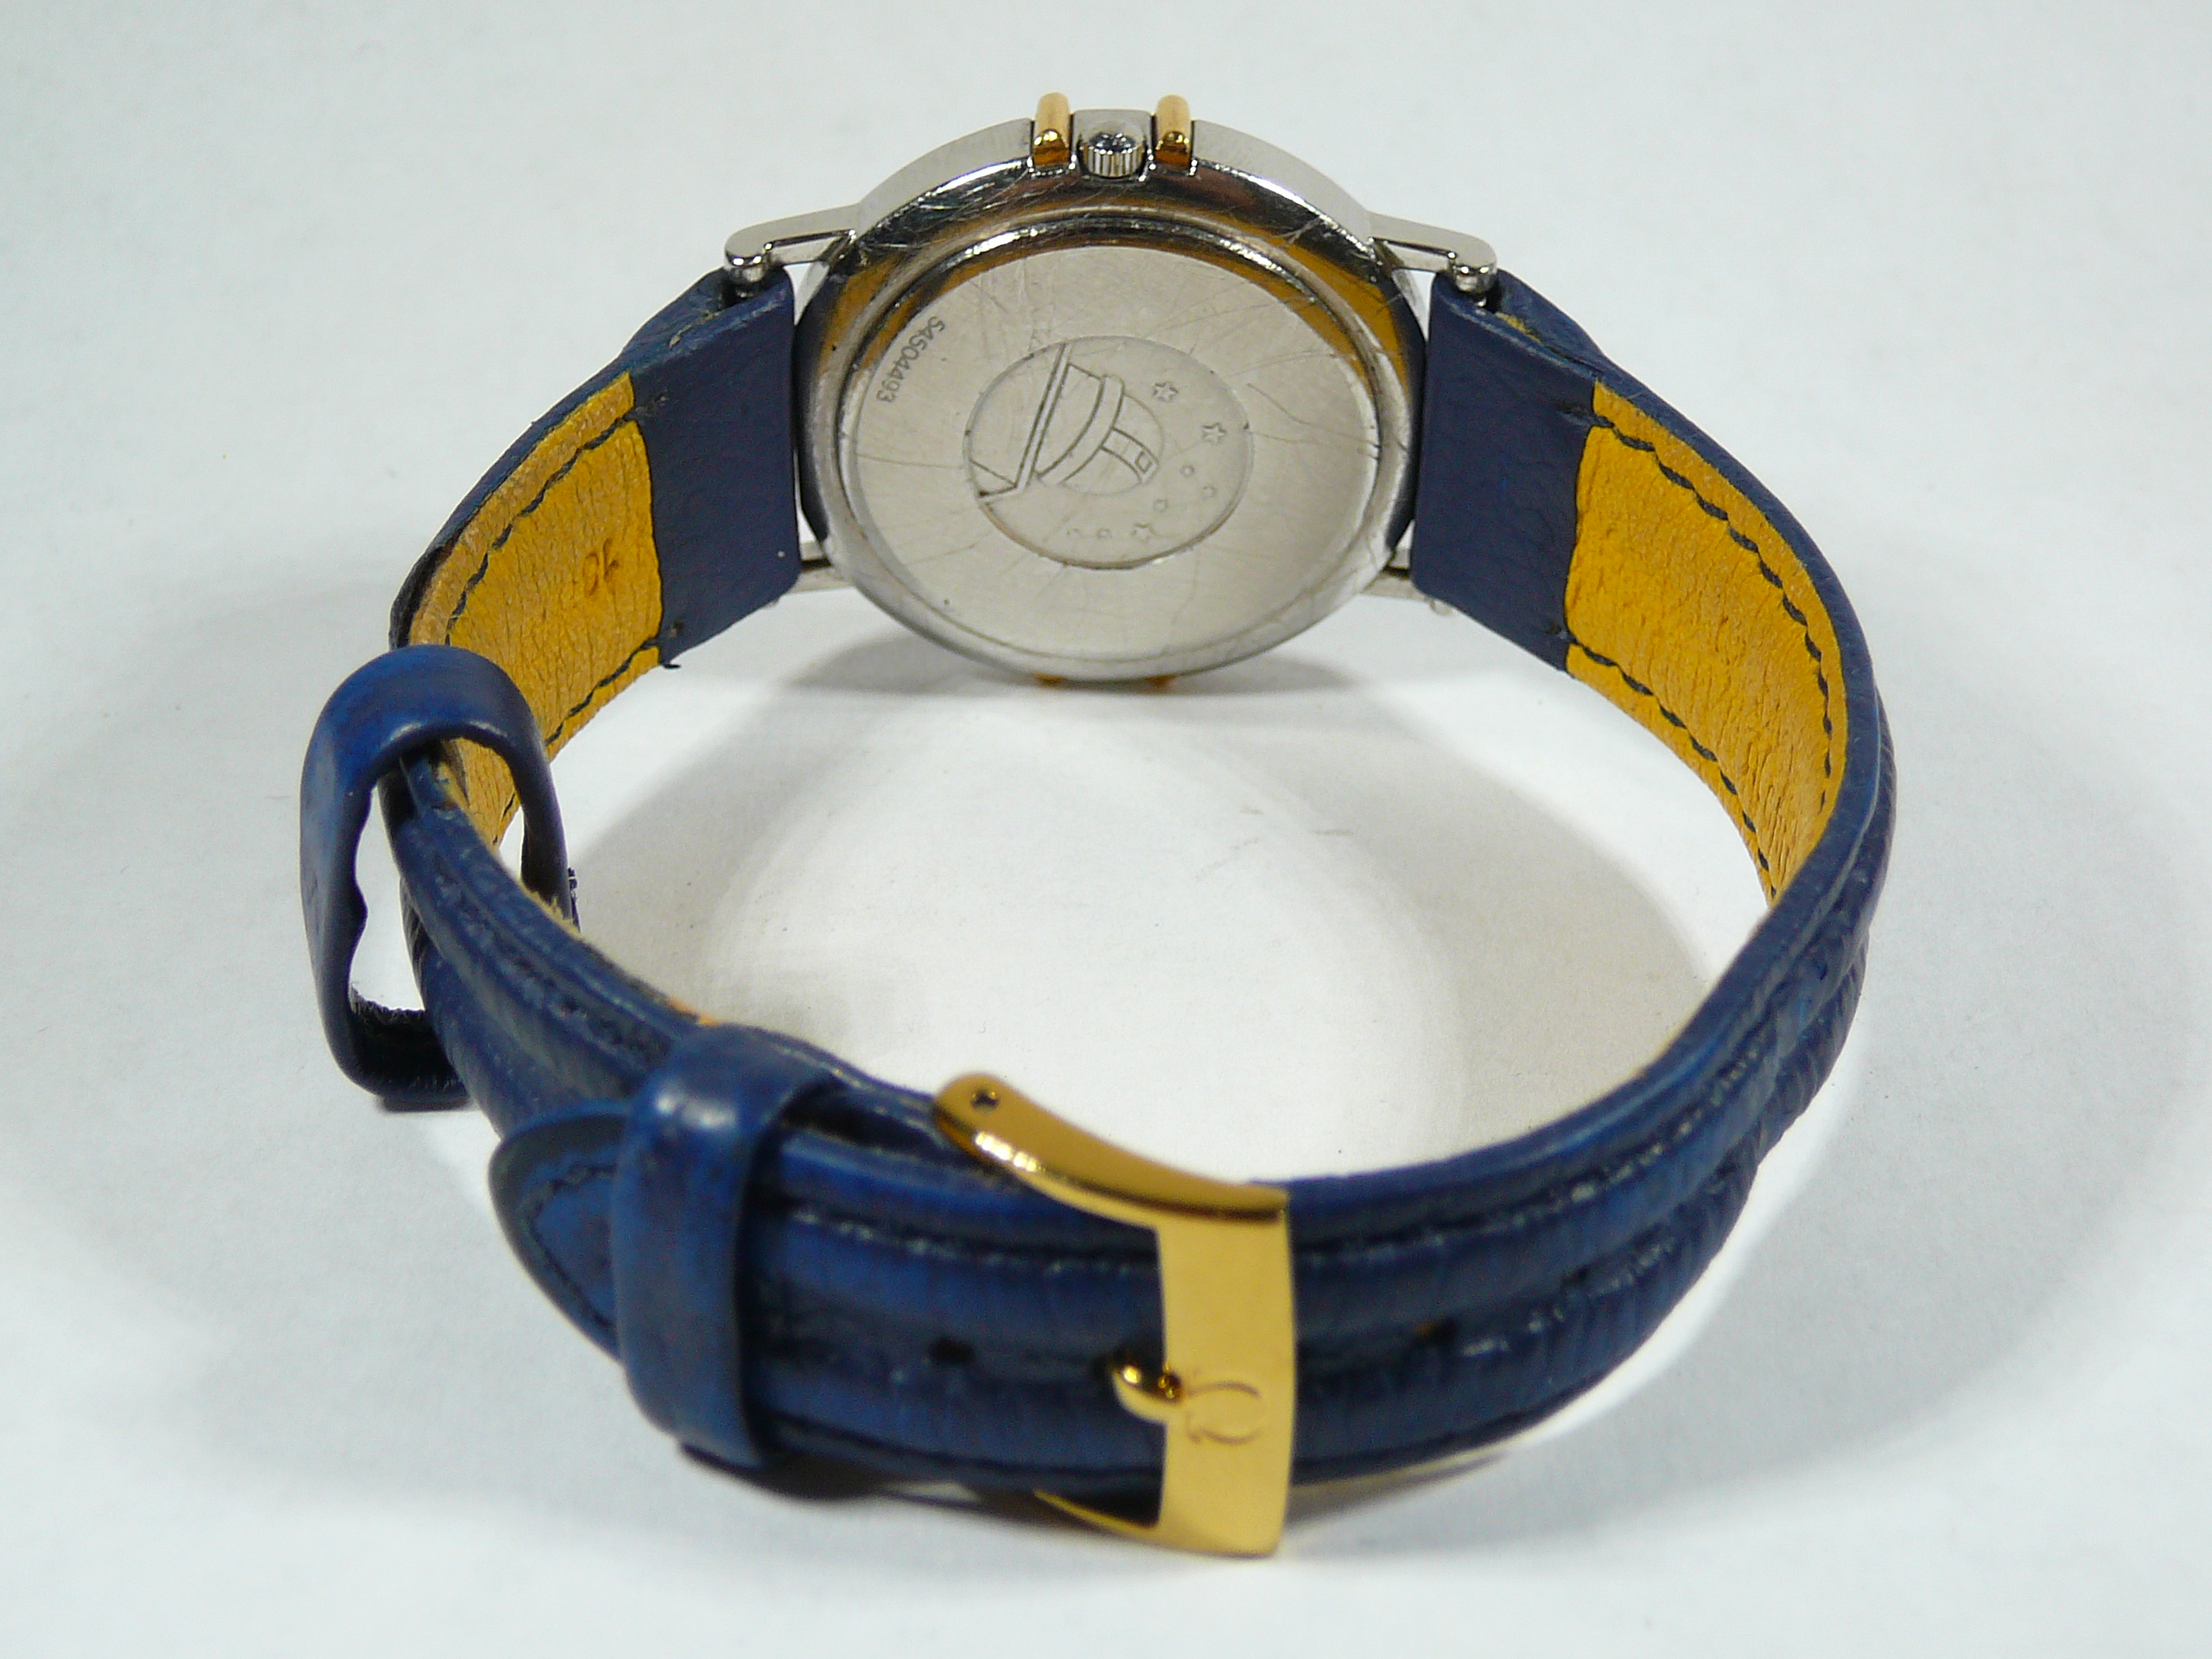 Gents Omega Wrist Watch - Image 3 of 3